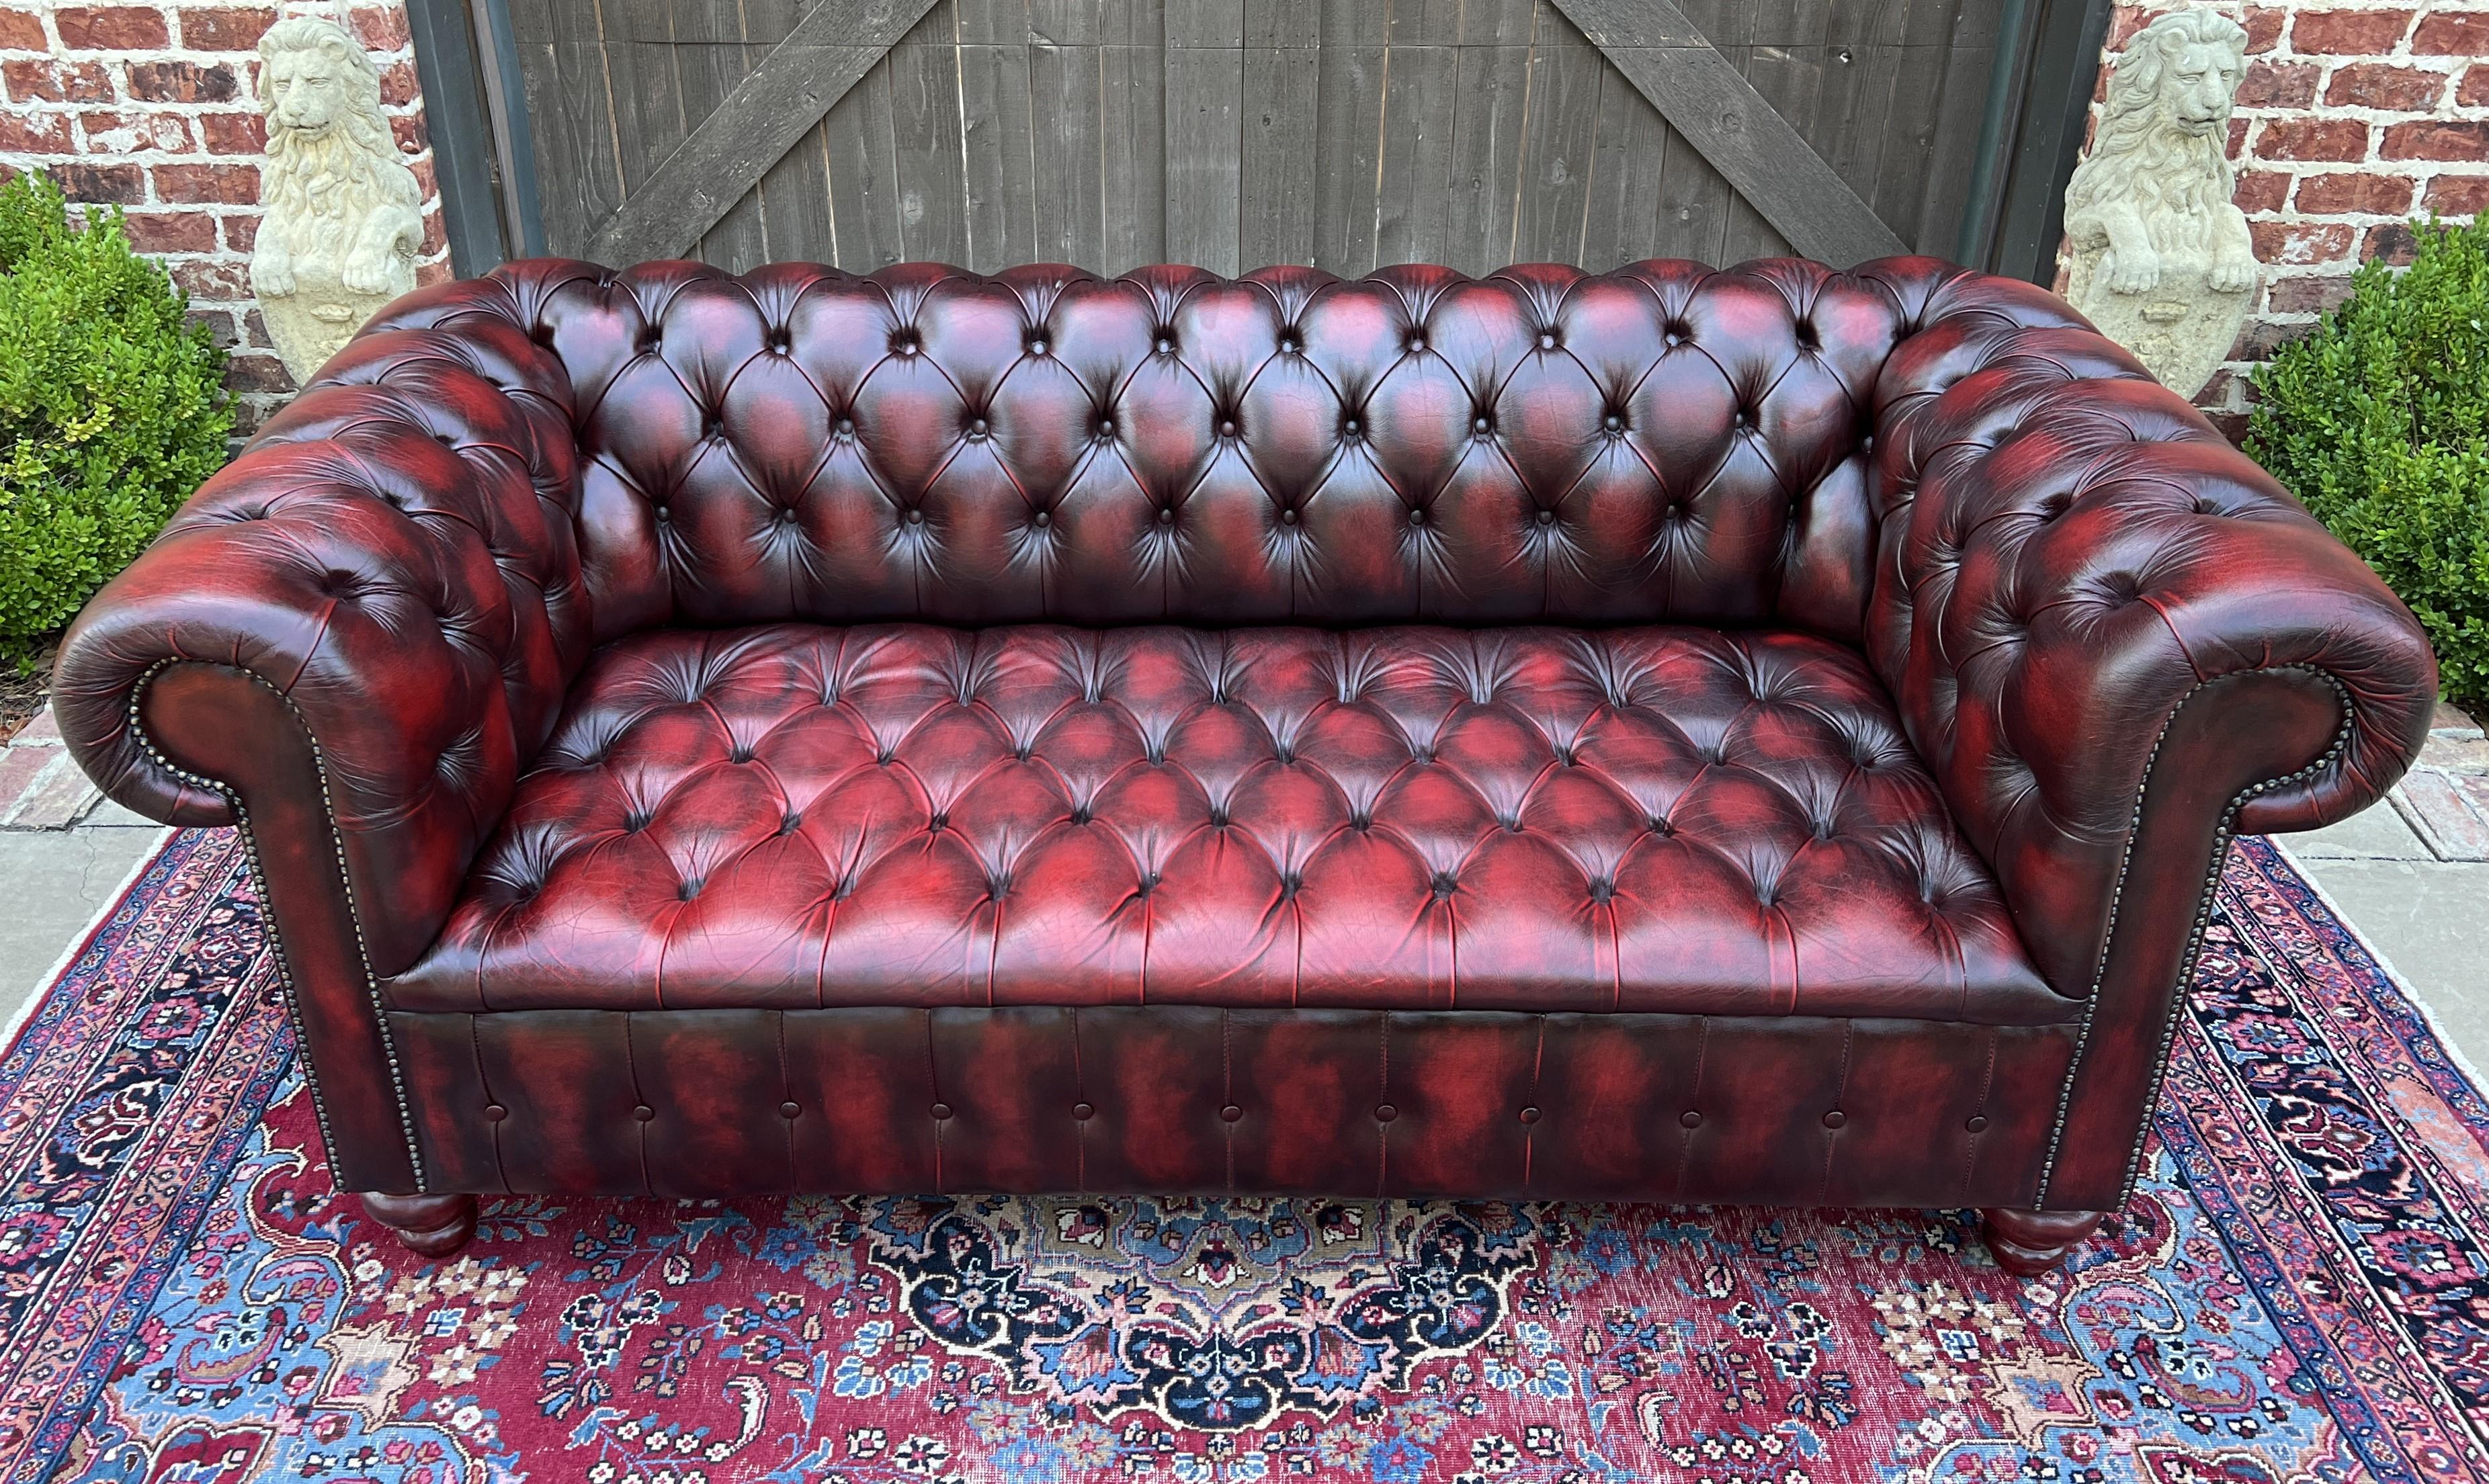 Vintage English Chesterfield Sofa Leather Tufted Seat Oxblood Red Mid-Century #1 3